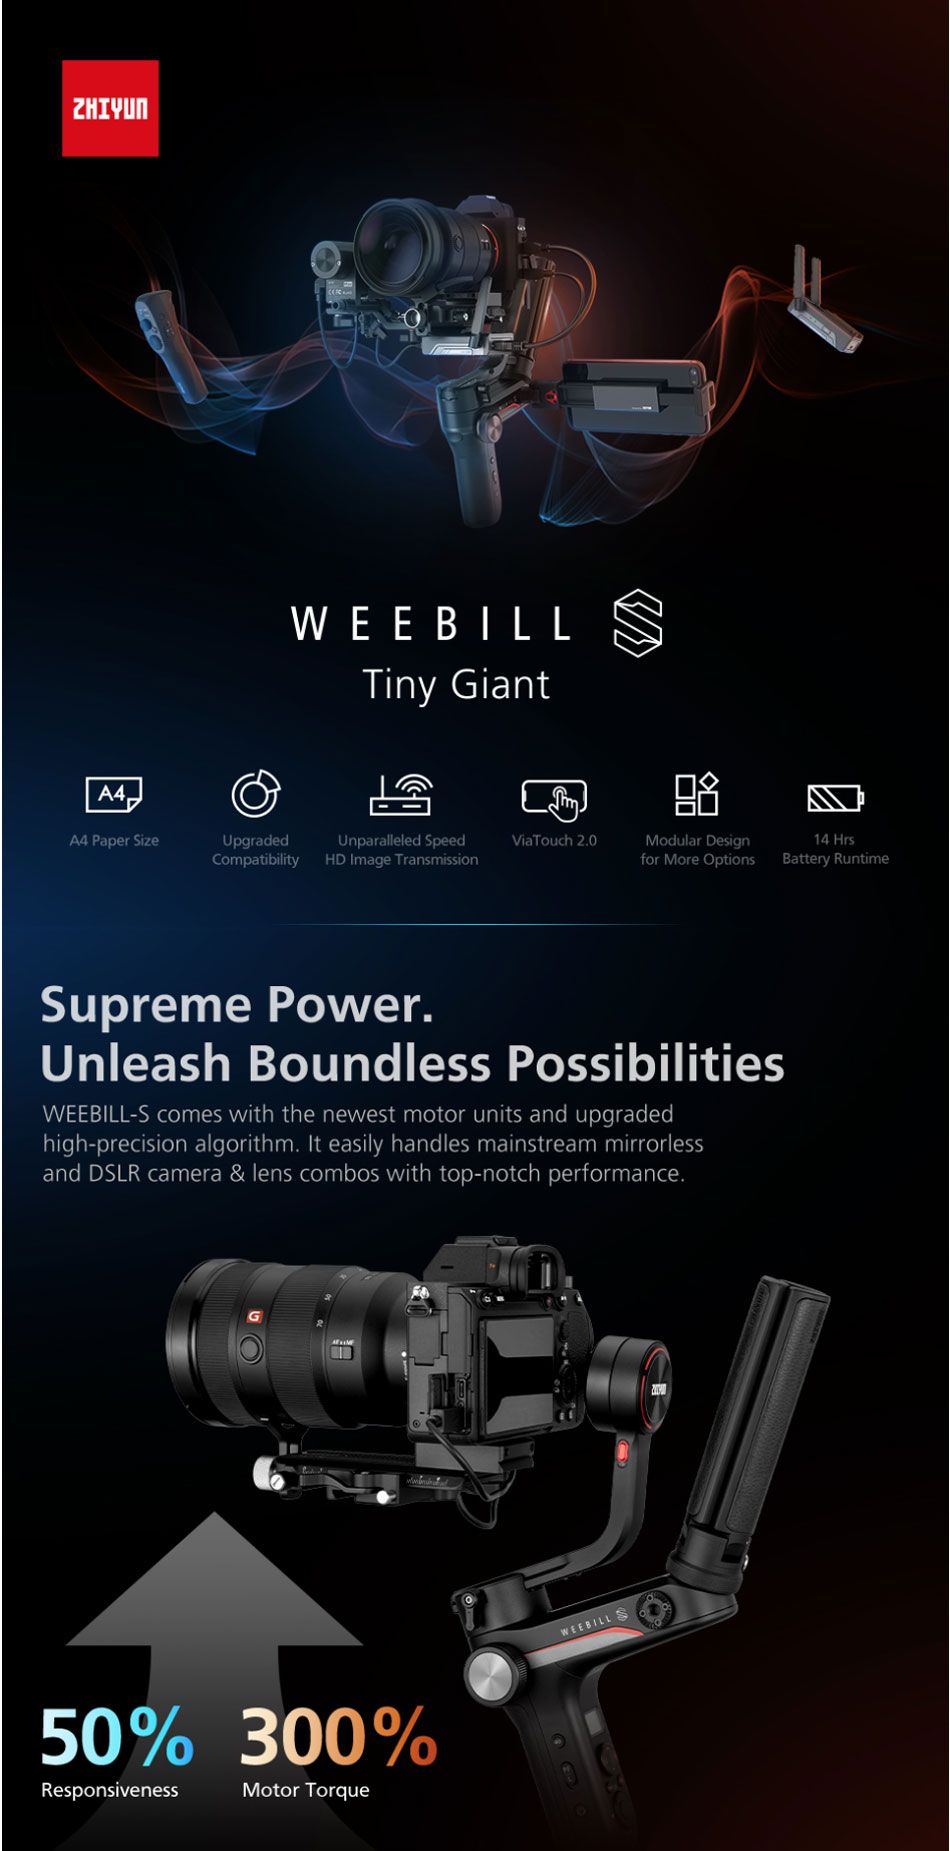 Zhiyun-Weebill-S-3-Axis-Image-Transmission-Handheld-Gimbal-Stabilizer-for-Mirrorless-Camera-1594762